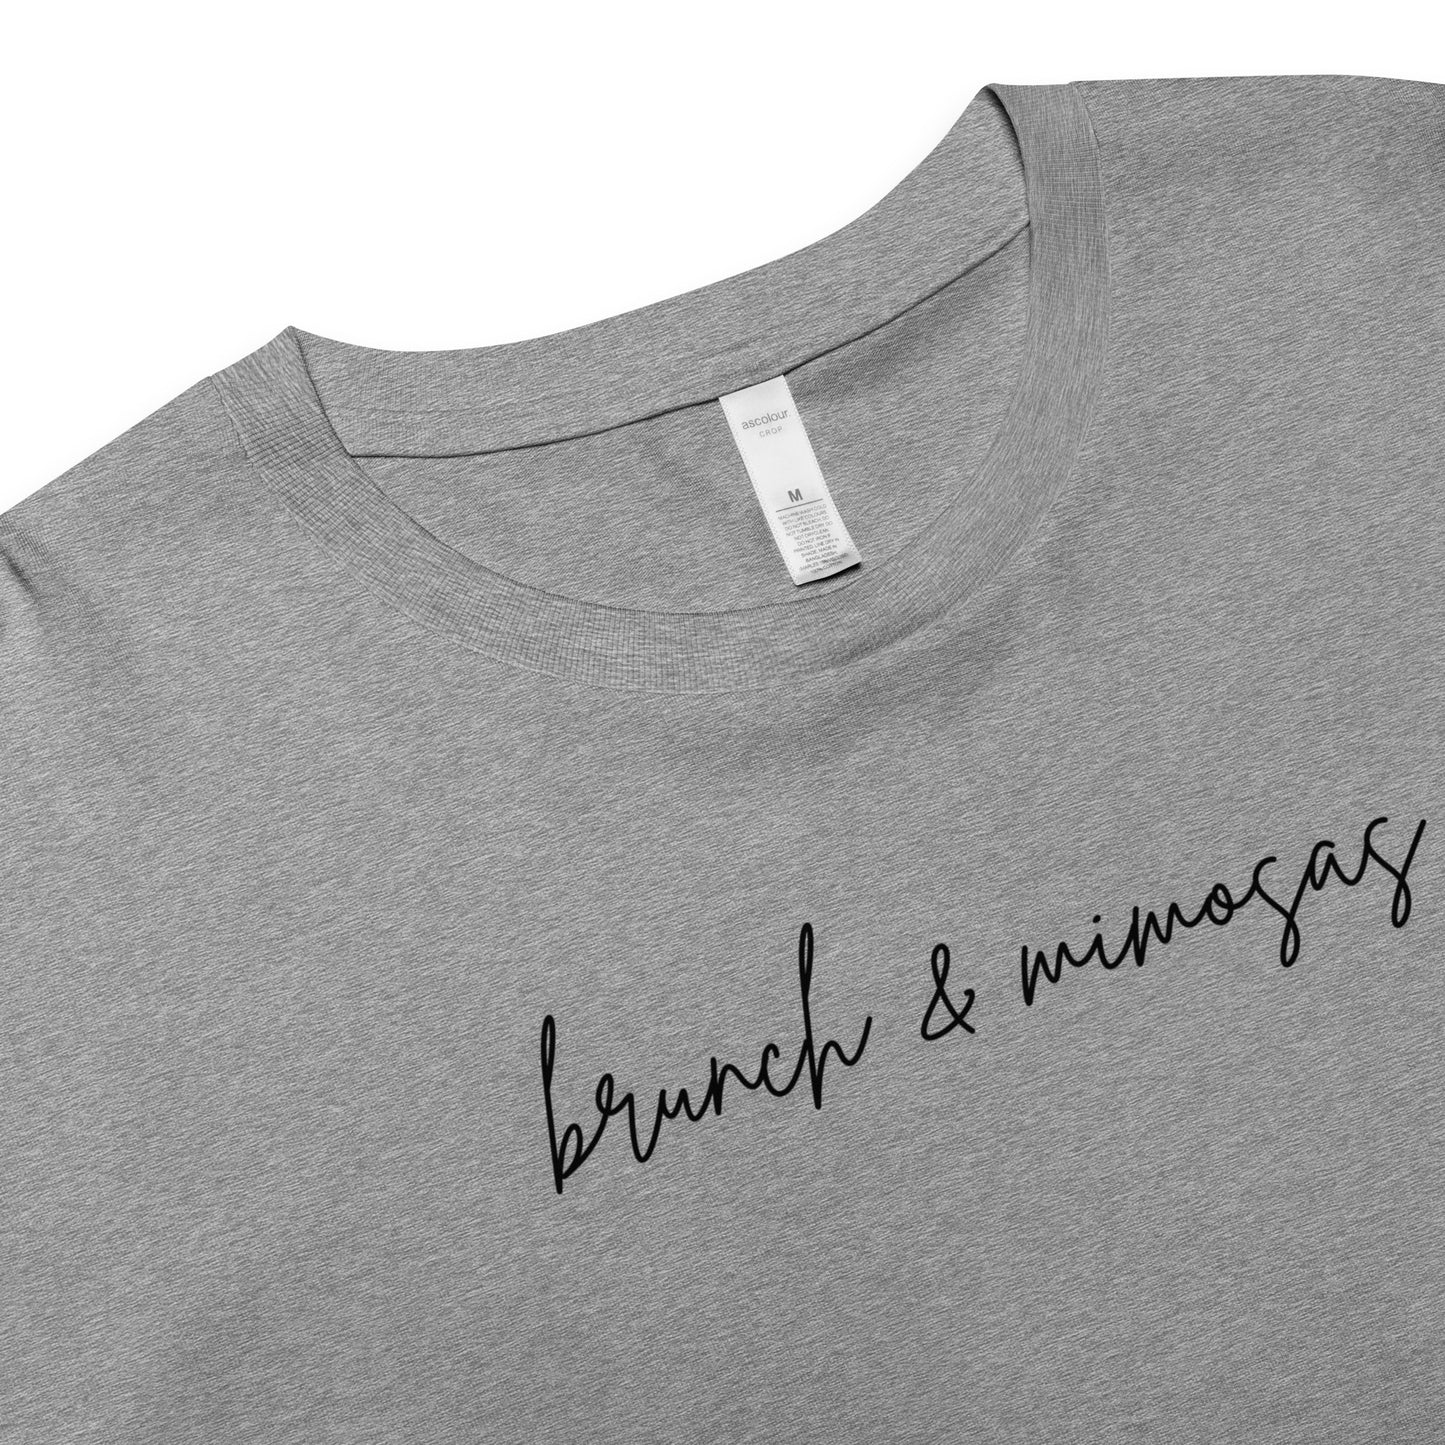 Brunch & Mimosas | Women’s Crop Top | Relaxed Fit